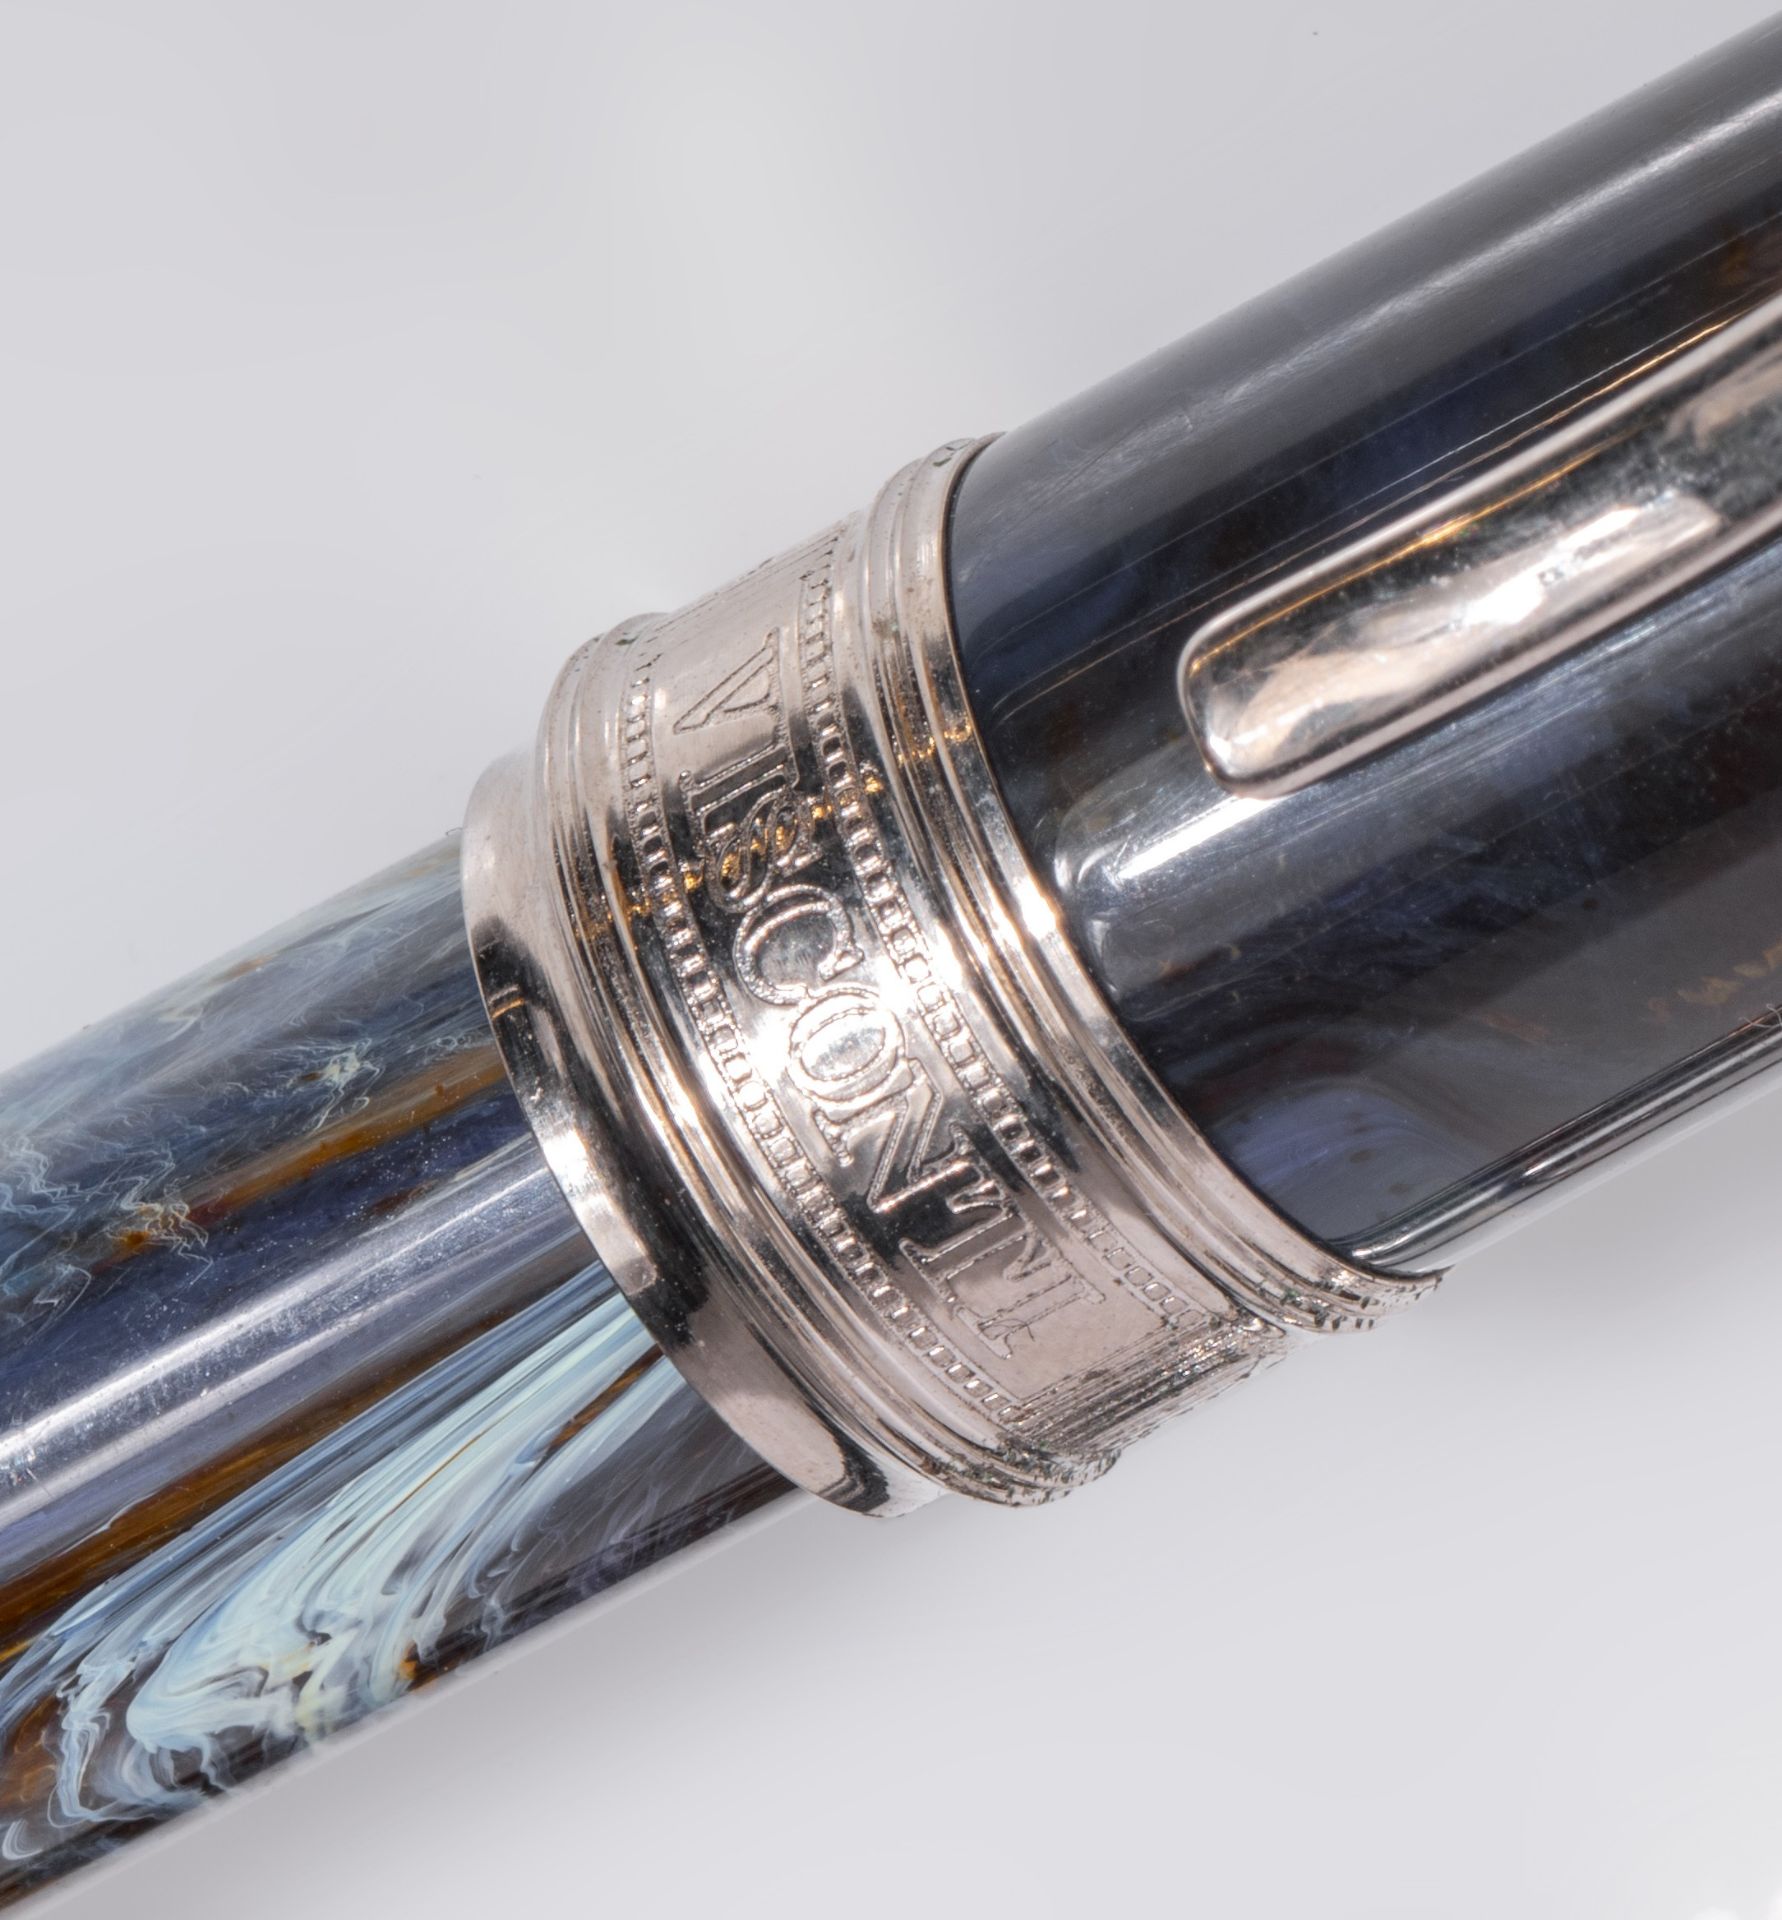 A Jorg Hysek rollerball/ballpoint and other writing equipment - Image 4 of 7